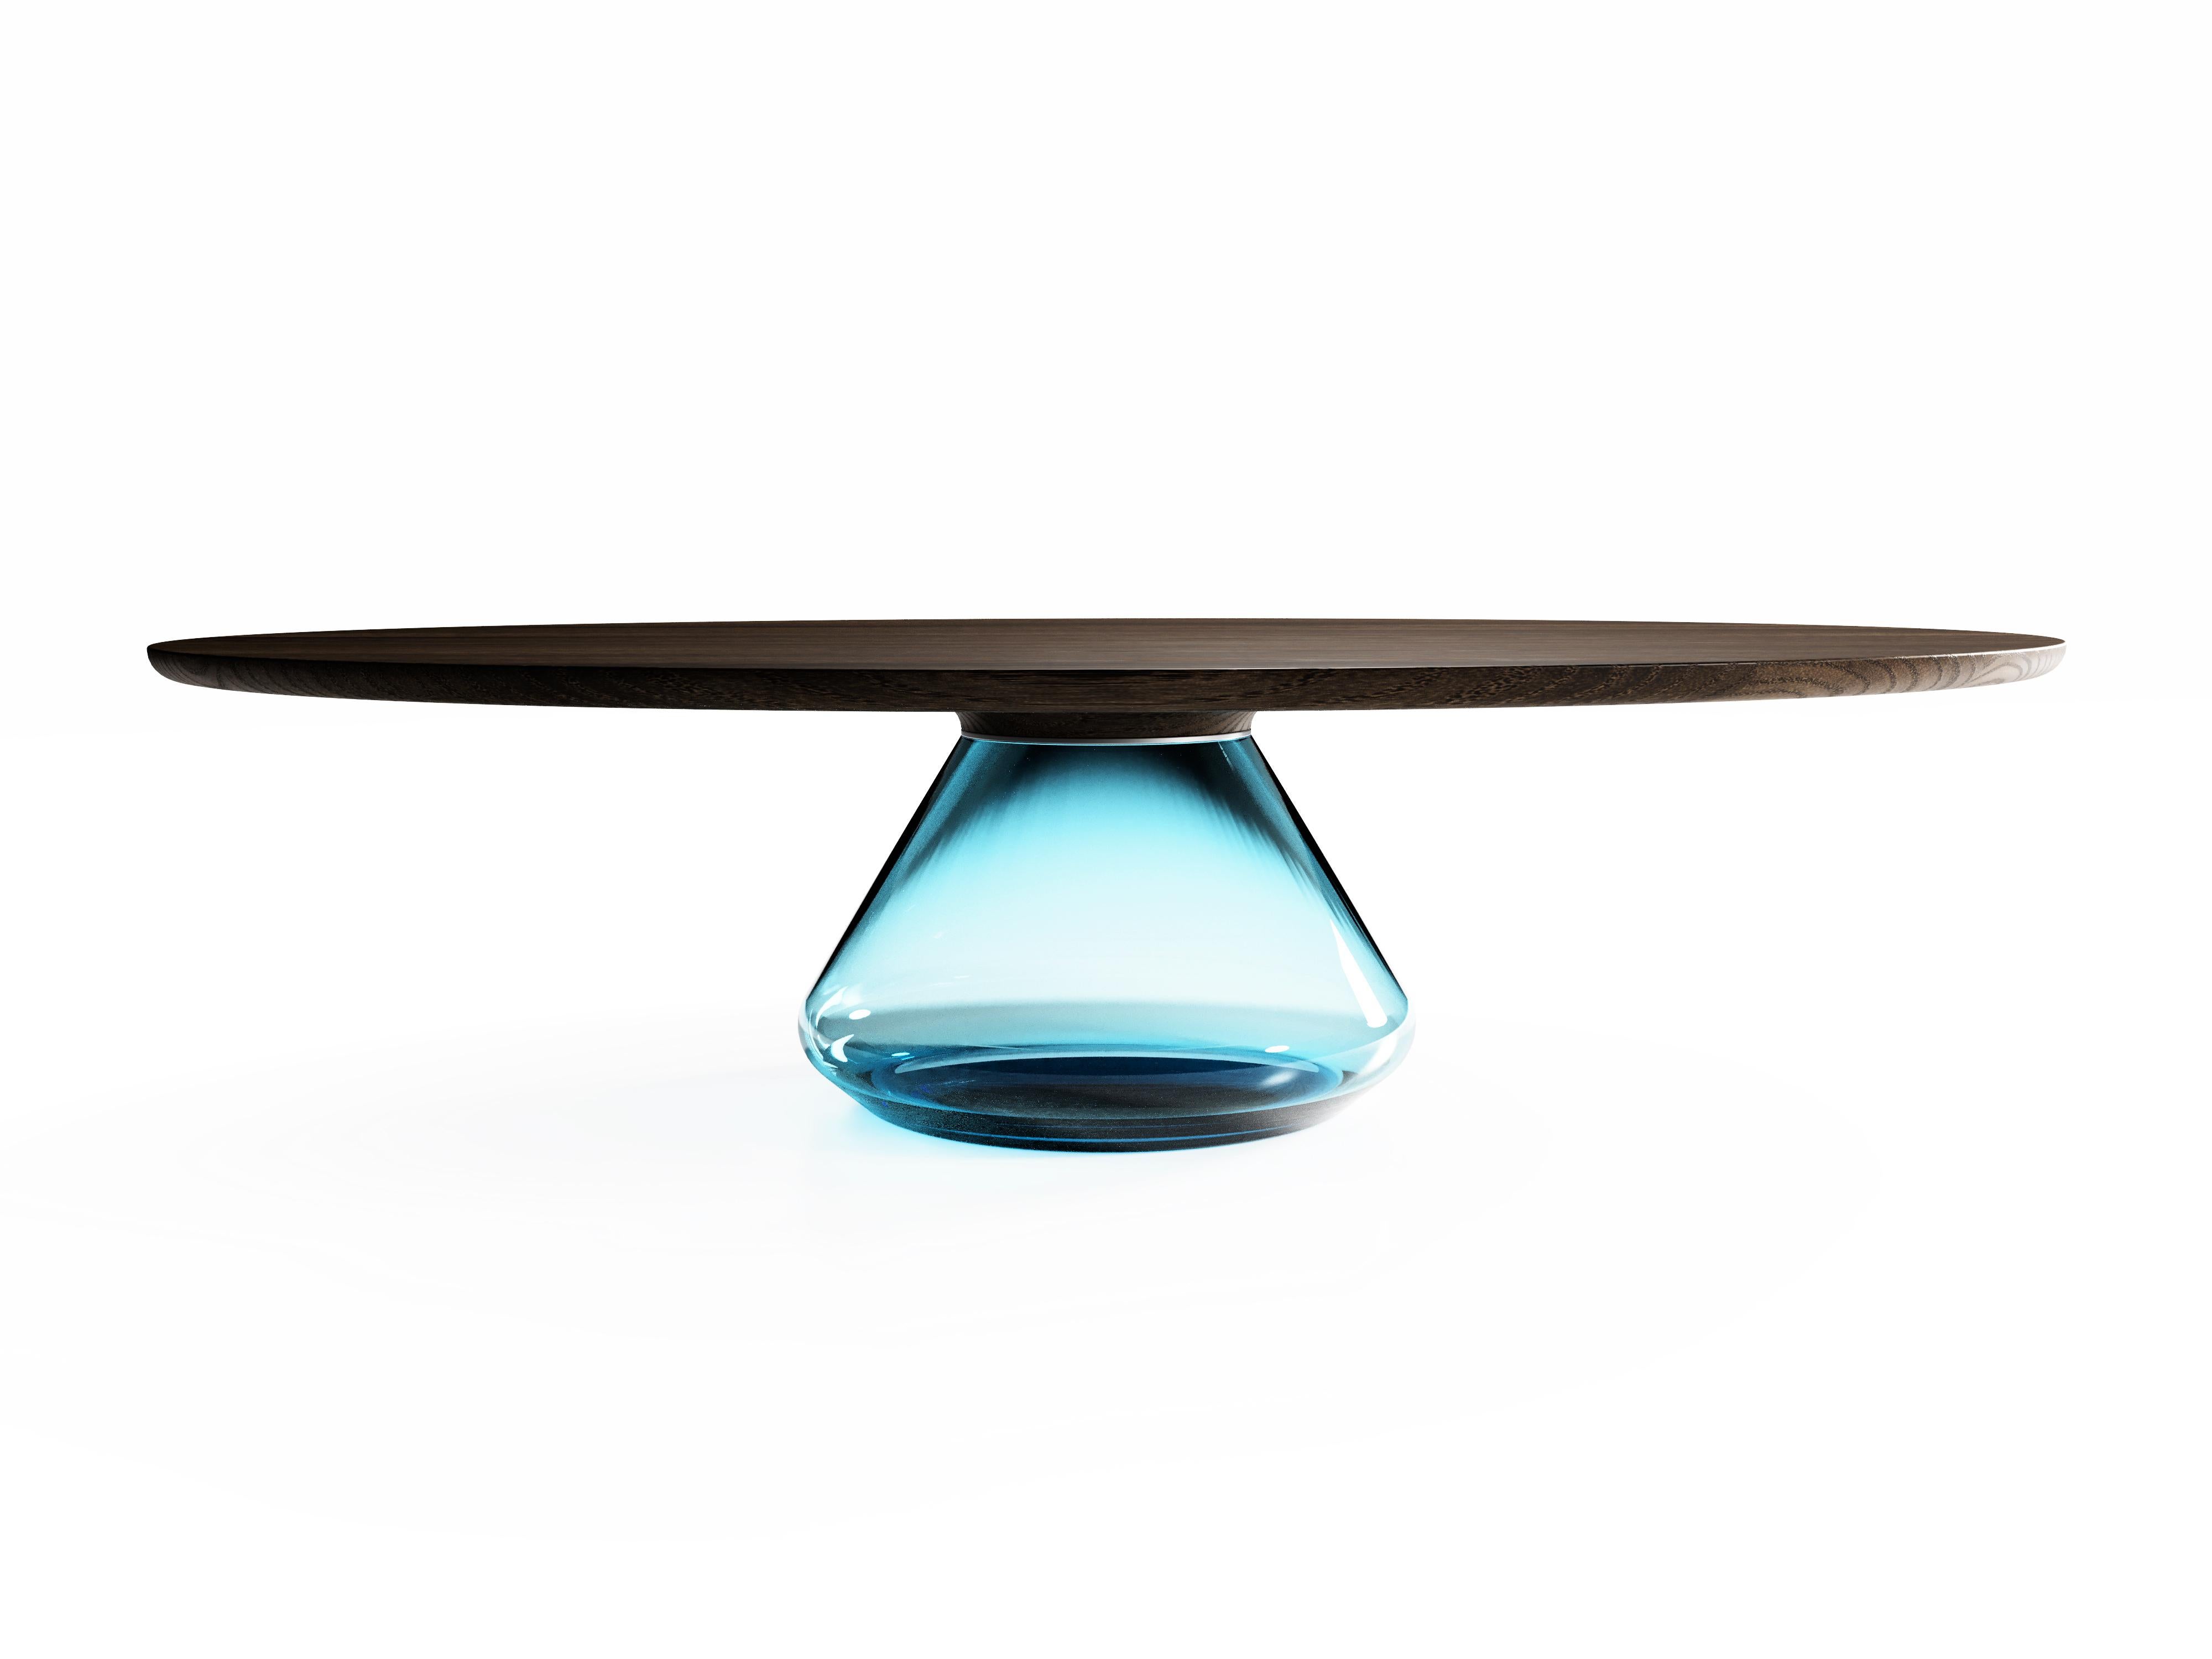 The sky Eclipse I, limited edition coffee table by Grzegorz Majka
Limited Edition of 8
Dimensions: 54 x 48 x 14 in
Materials: Glass, oak

The total eclipse of every interior? With this amazing table everything is possible as with its Minimalist